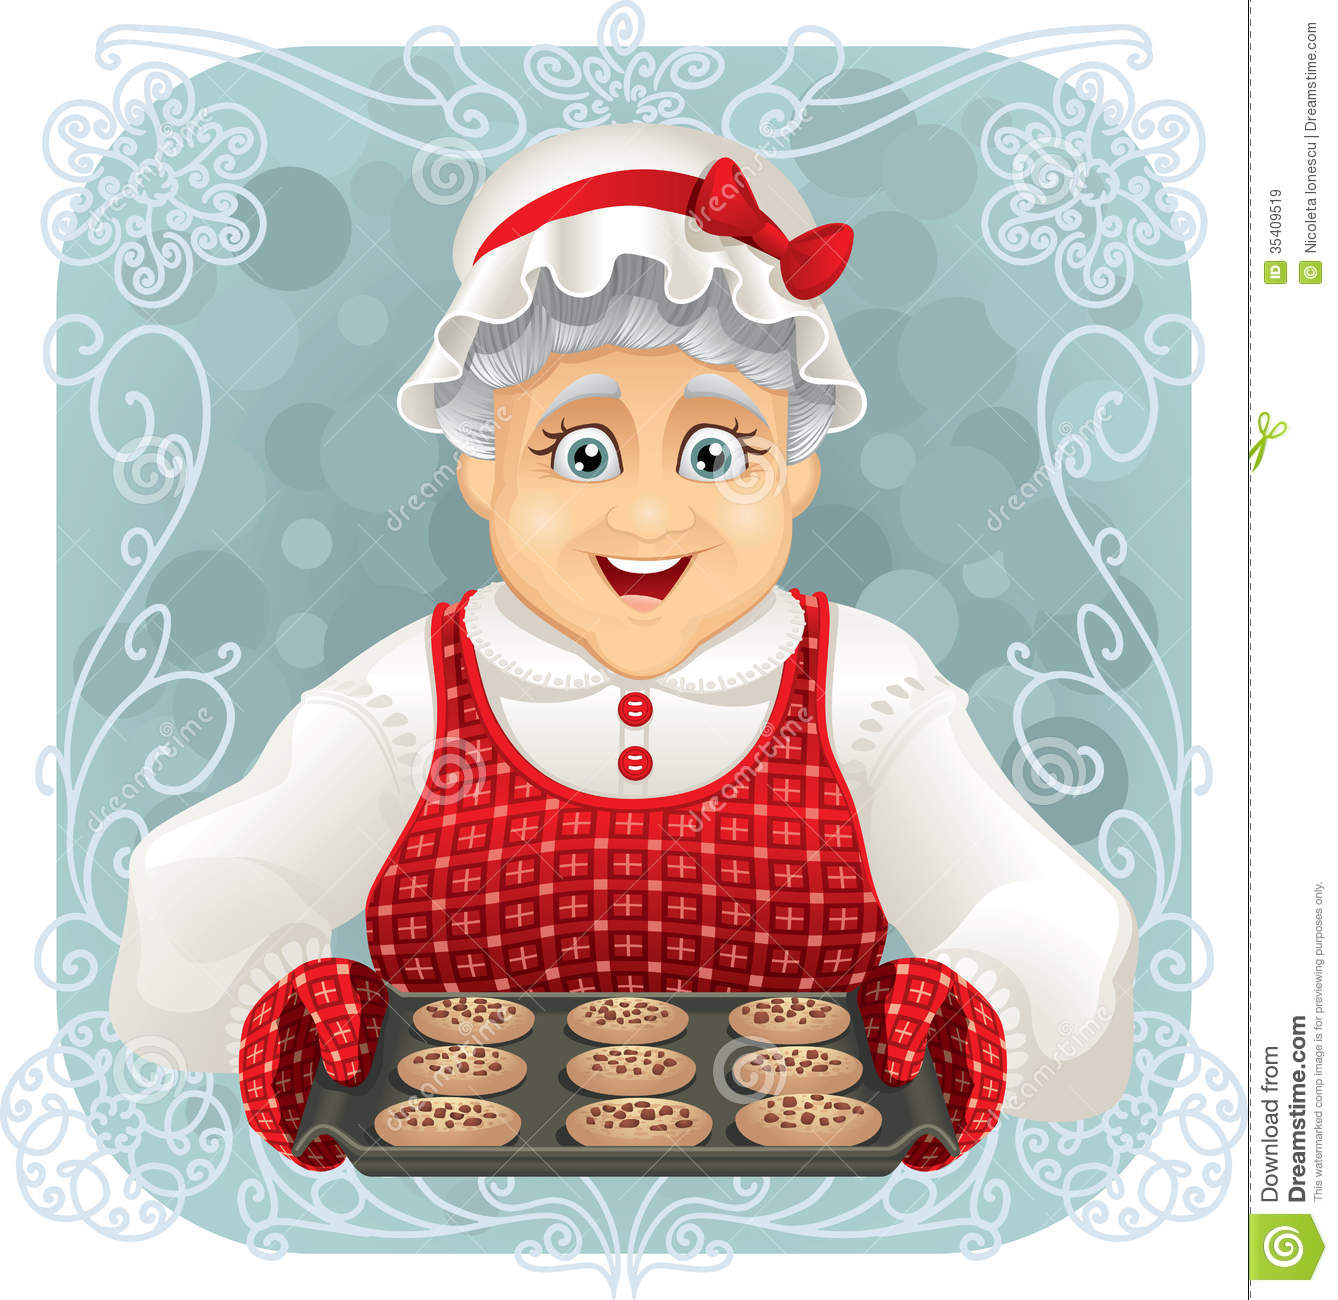 Grandma Baking Cookies Clipart Granny Baked Some Cookies